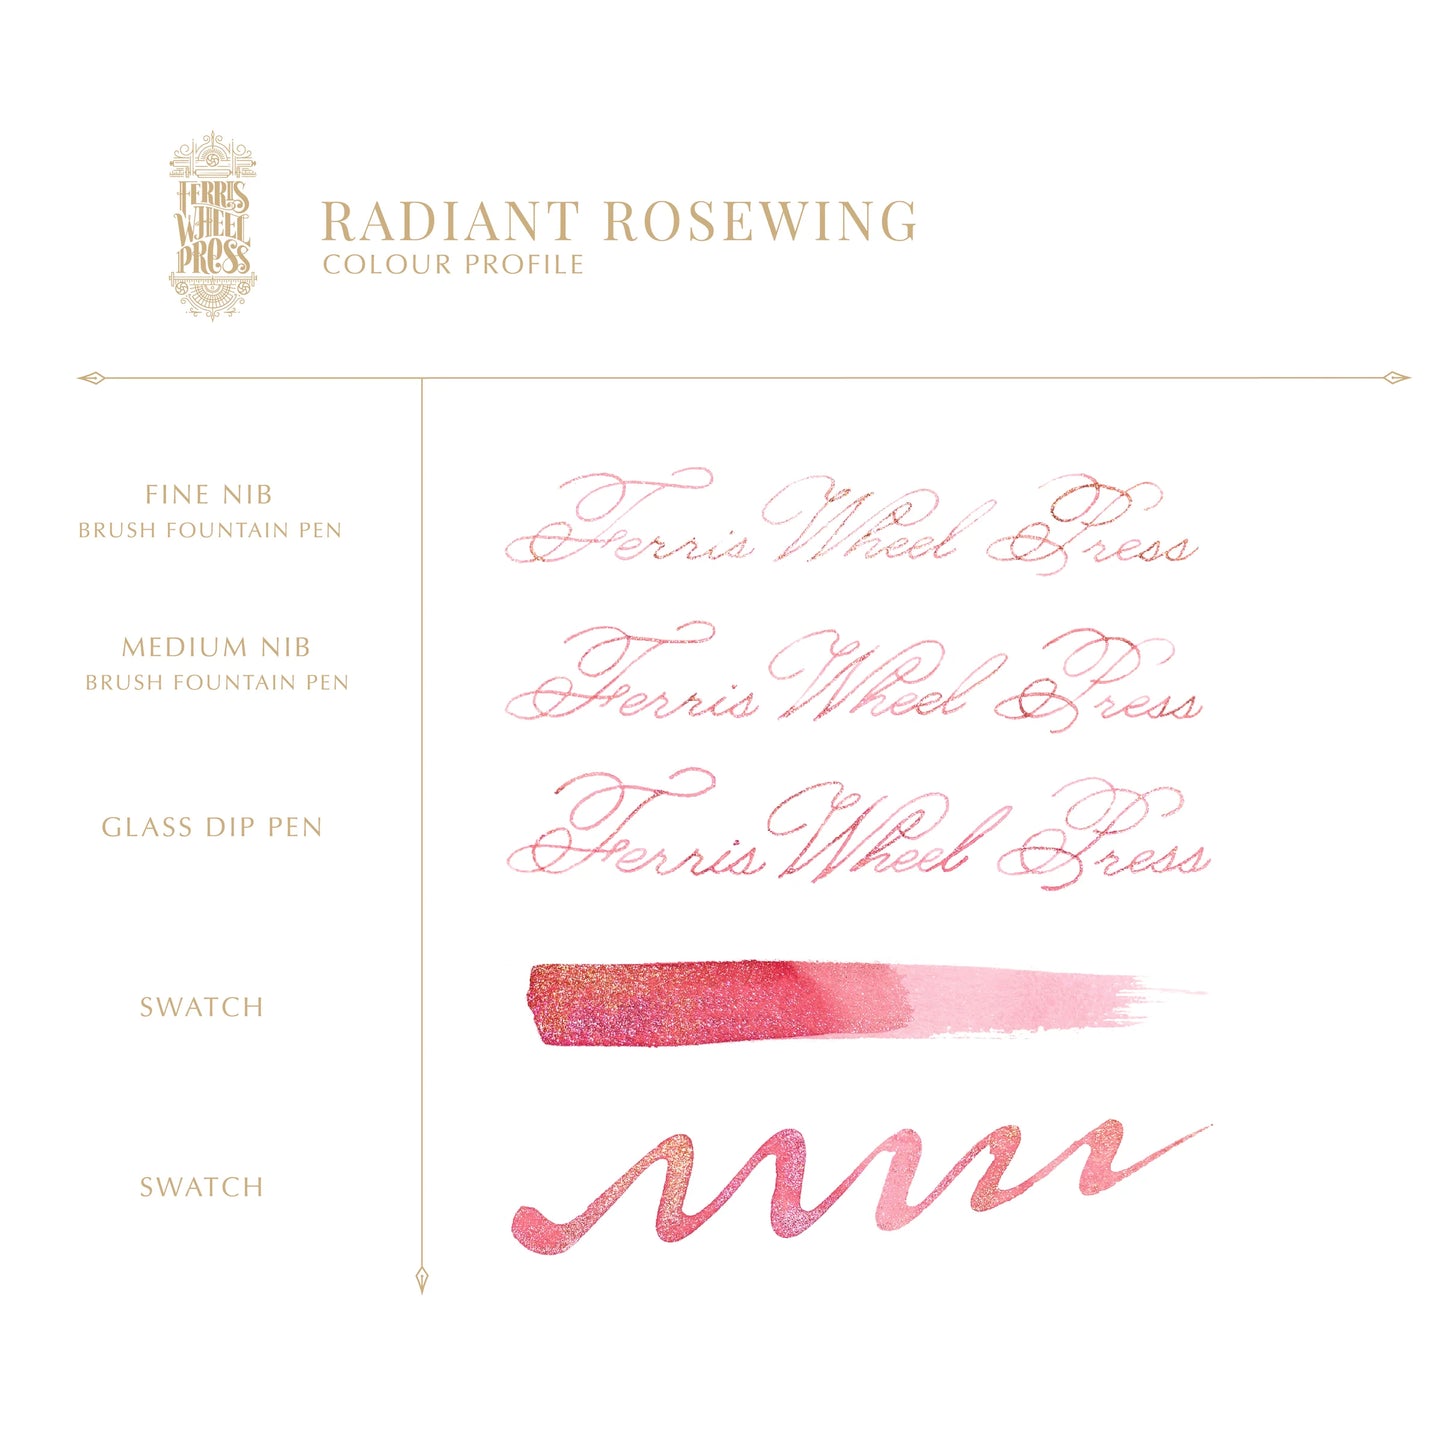 Ferris Wheel Press - The Wild Swans - Radiant Rosewing